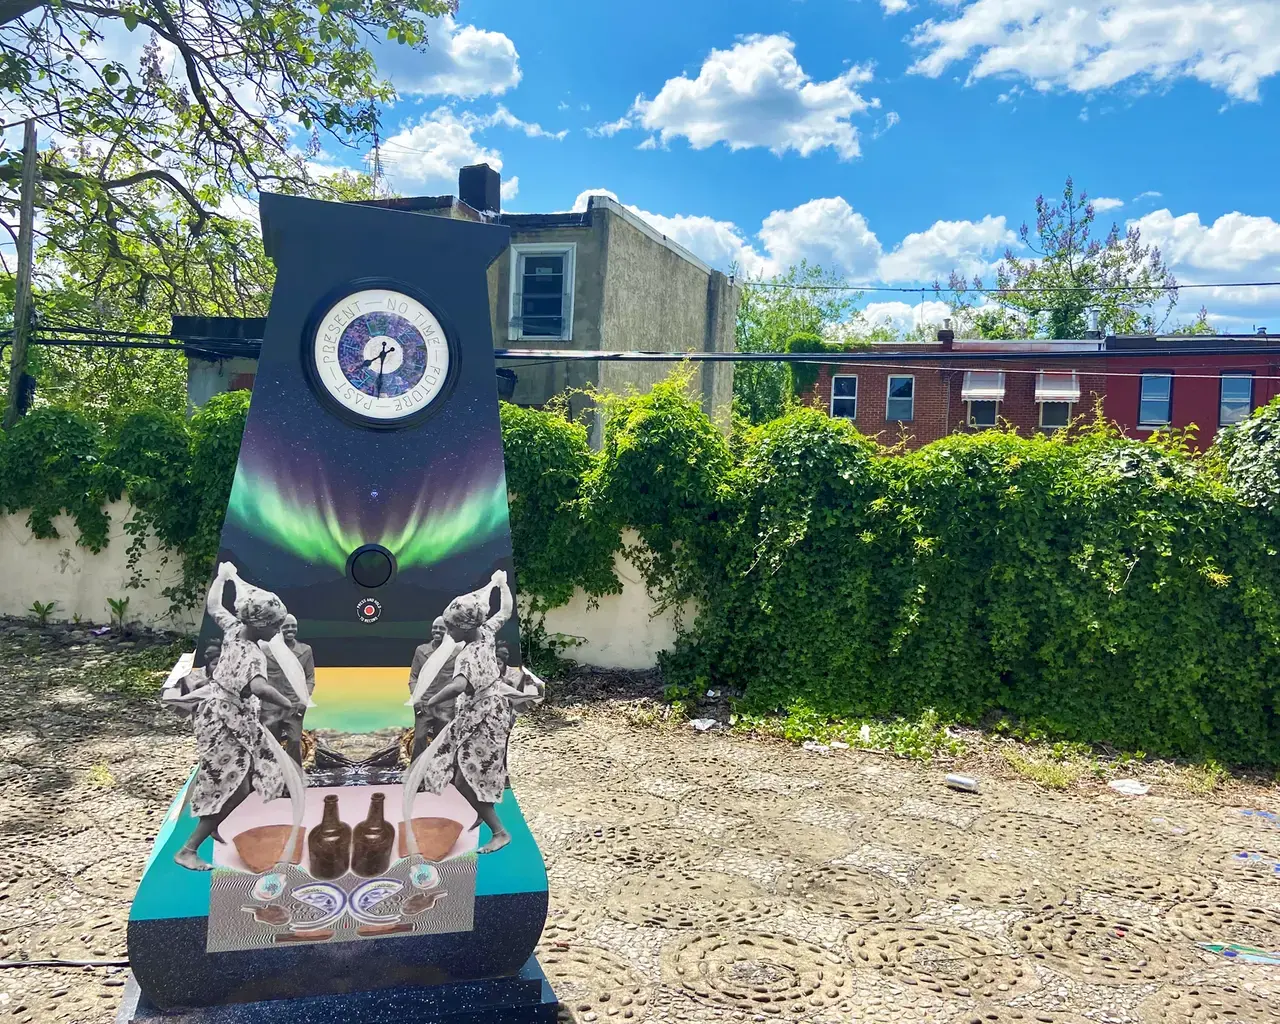 Black Quantum Futurism, Reclamation: Space-Times, 2021, part of Staying Power exhibition, The Village of Arts and Humanities with Monument Lab, Fairhill-Hartranft neighborhood, Philadelphia, Pennsylvania. Photo courtesy of The Pew Center for Arts &amp; Heritage.